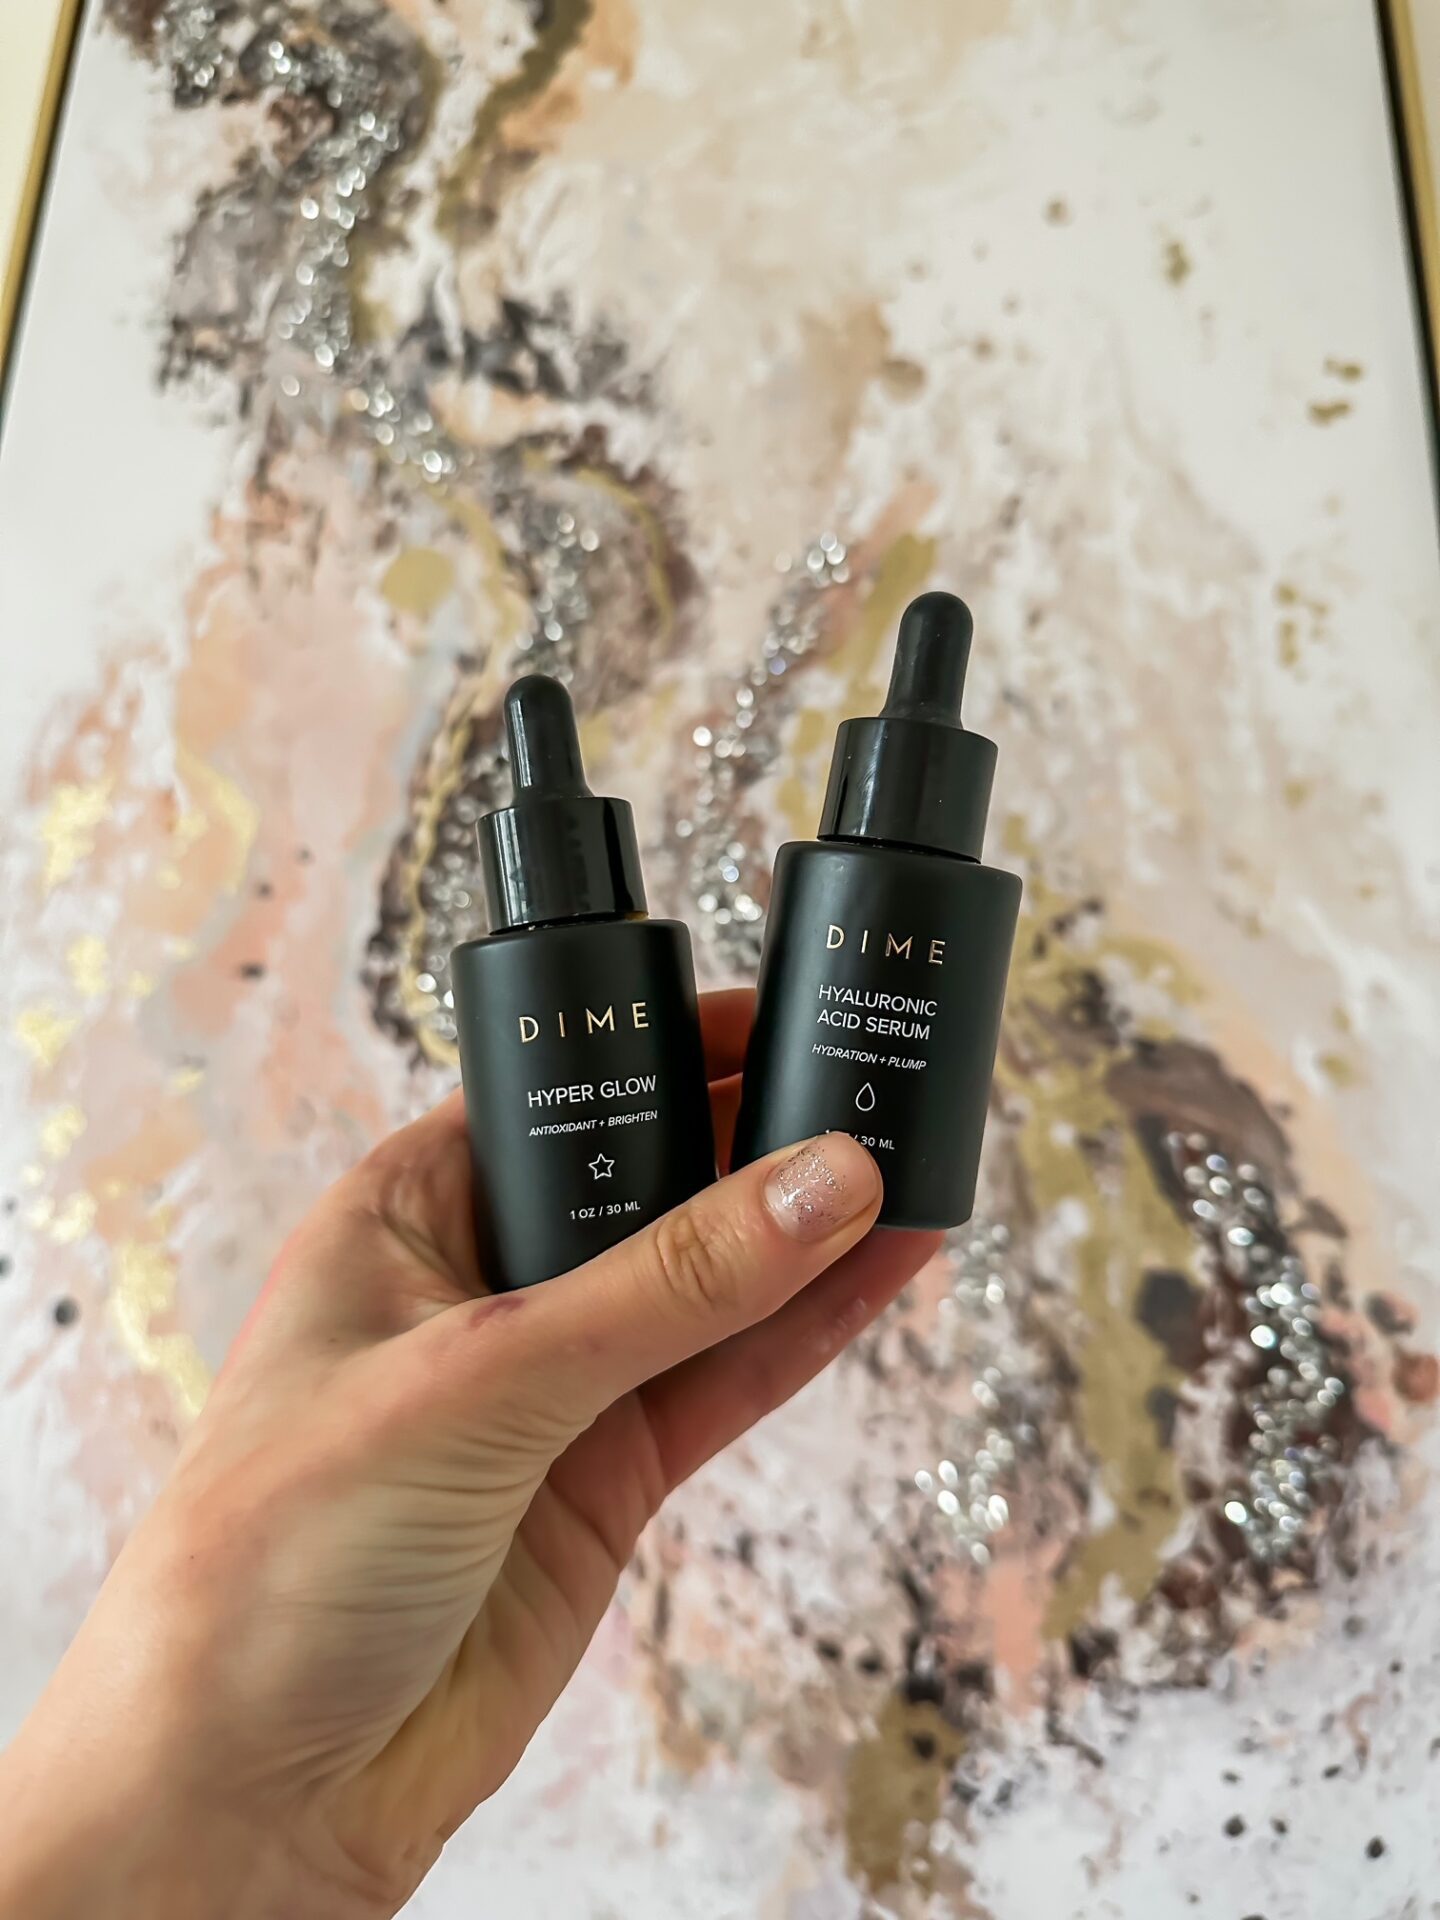 DIME Beauty Reviews - the Hyper Glow Serum and Hyaluronic Acid Serum on Coming Up Roses